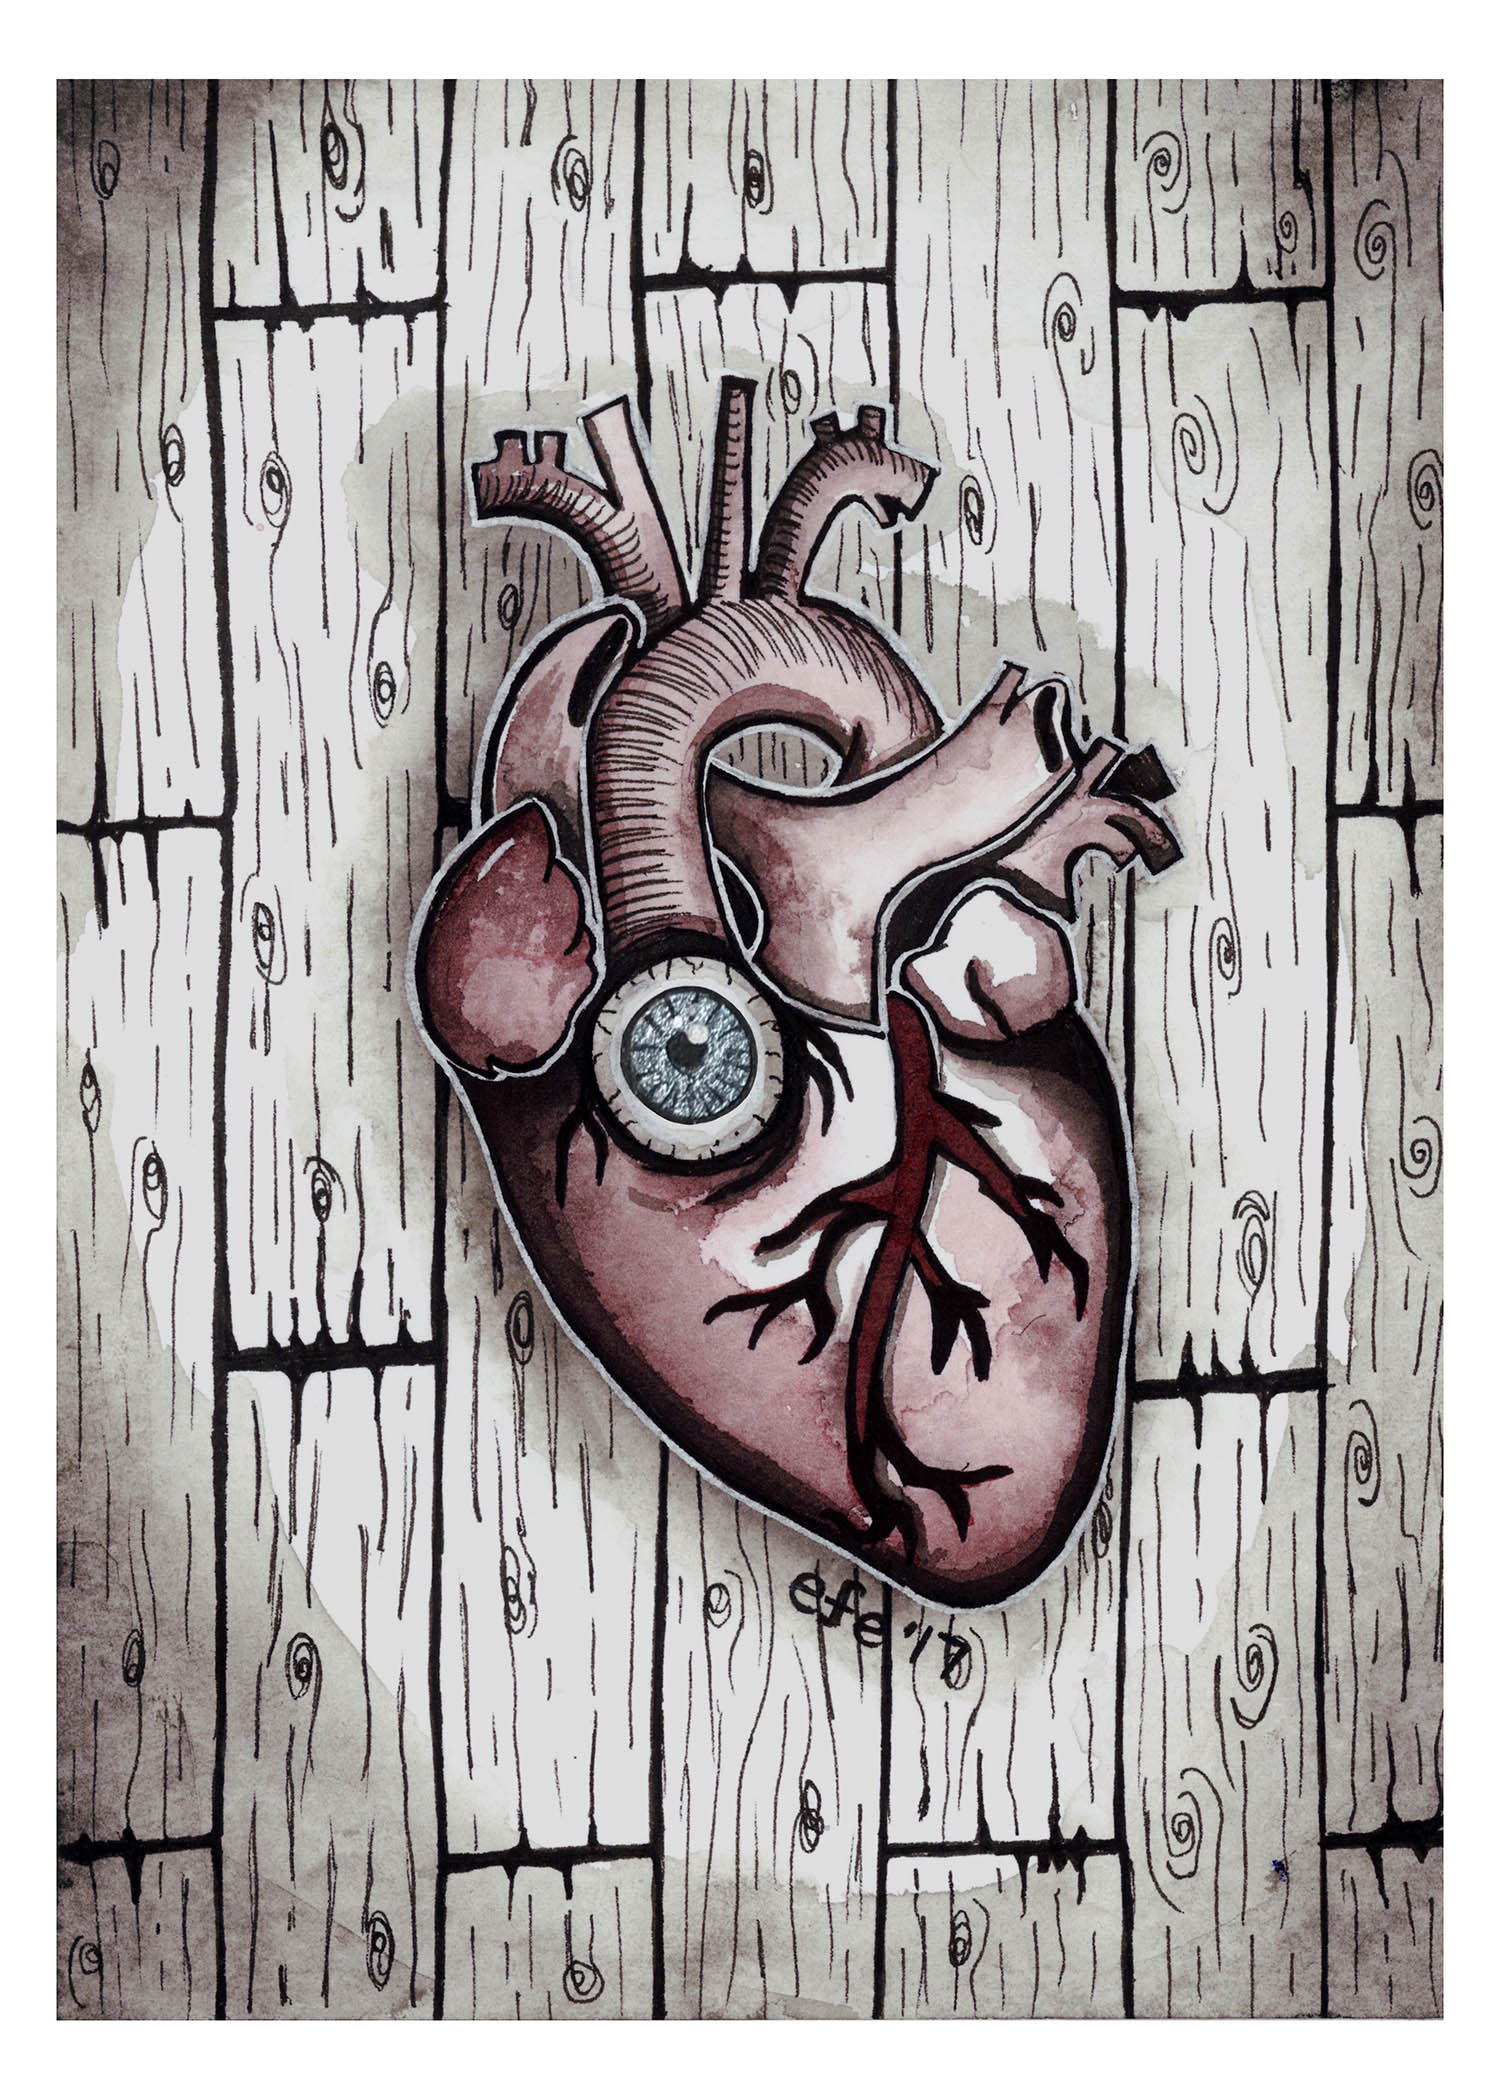 Day 05 - The Tell Tale Heart